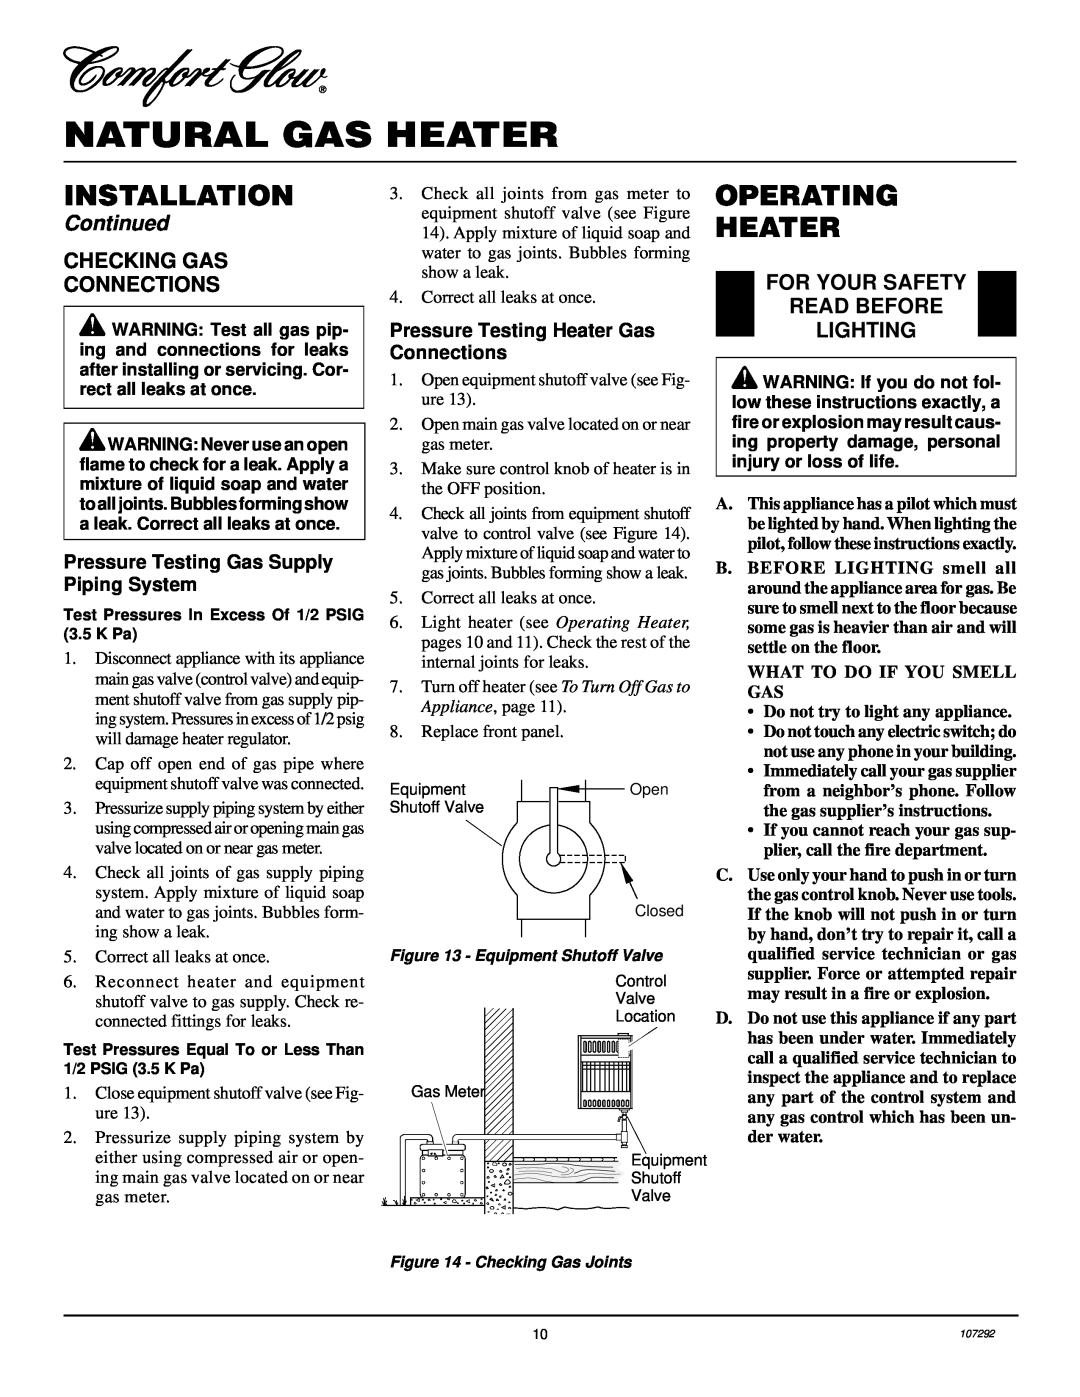 Desa CGR2N installation manual Operating Heater, Natural Gas Heater, Installation, Continued, Checking Gas Connections 